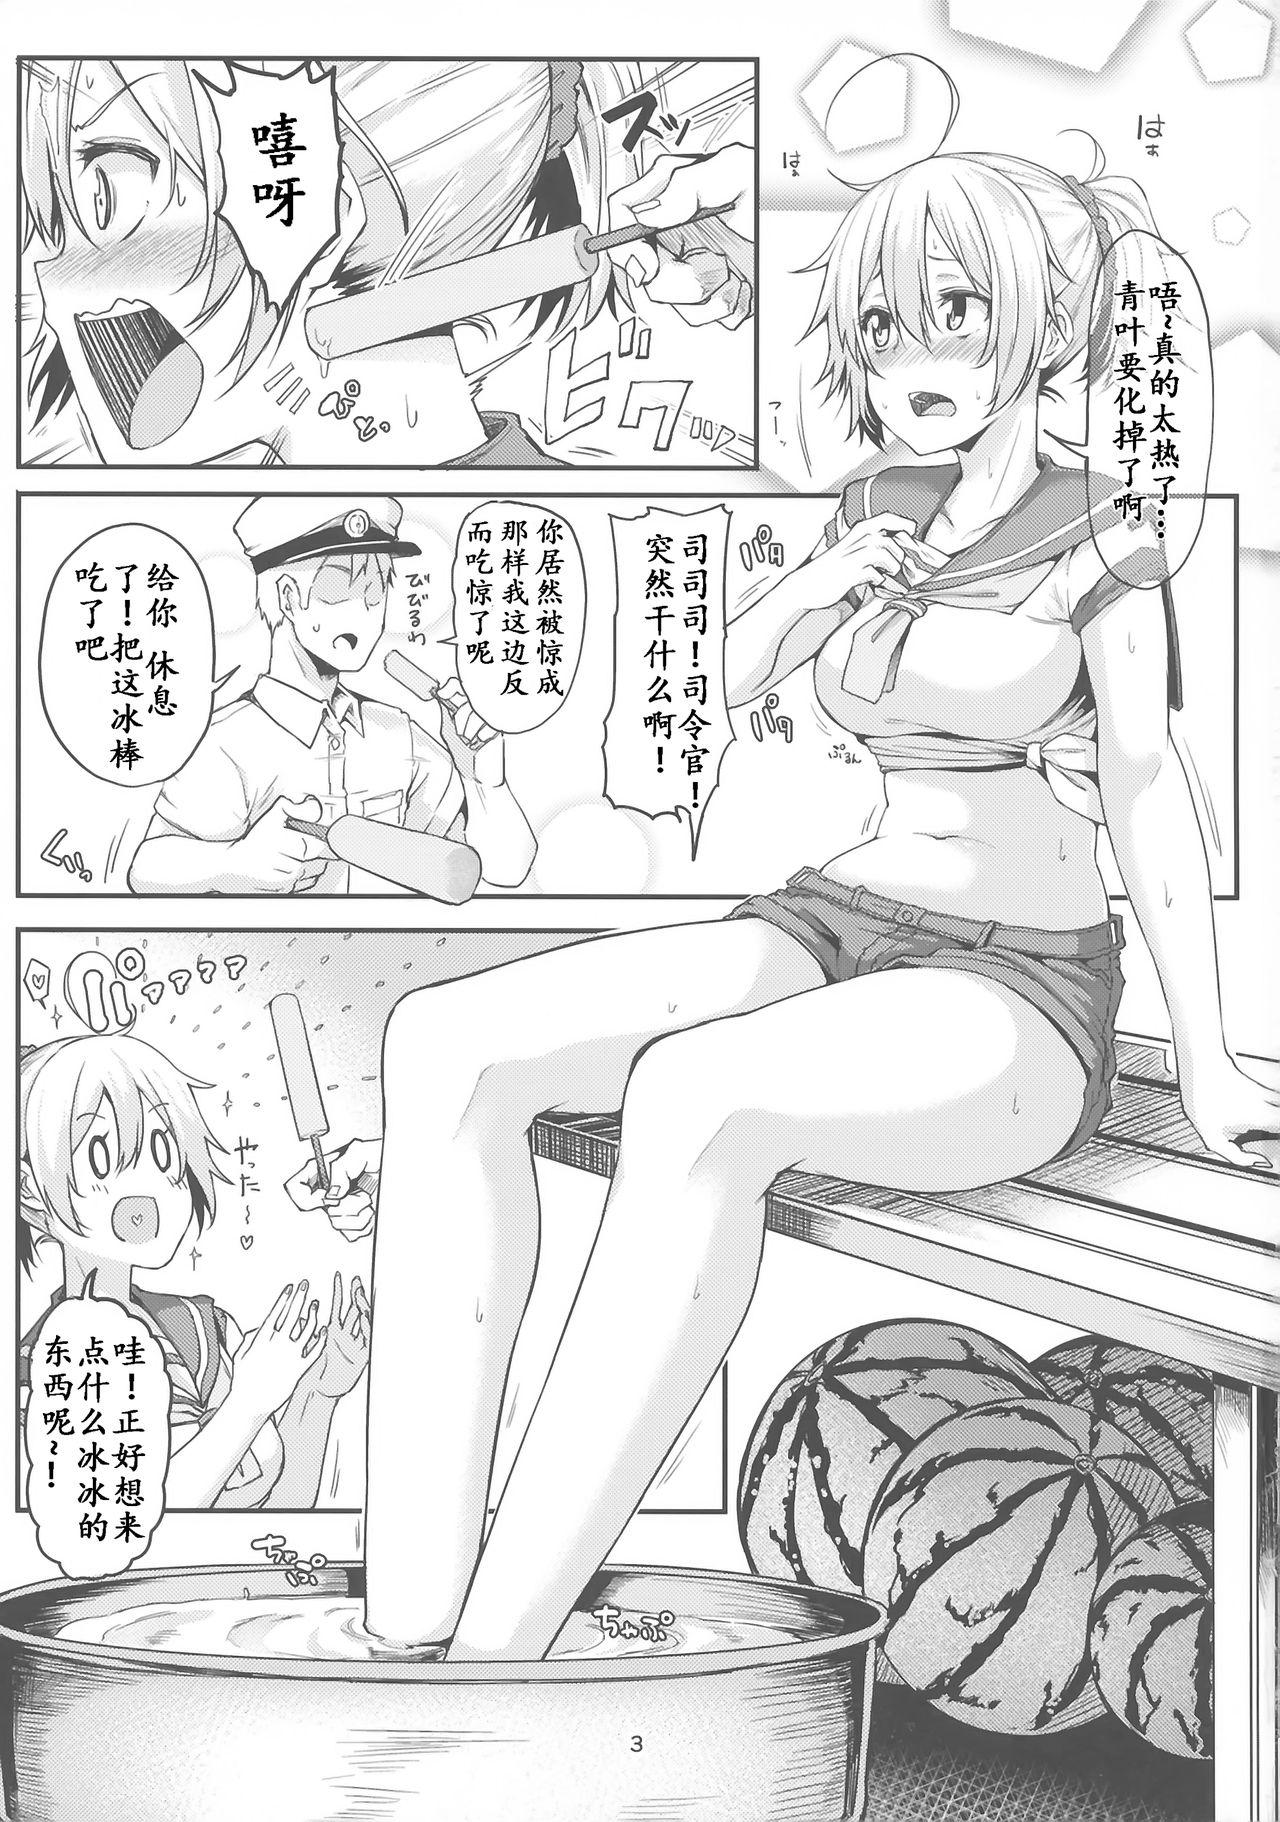 Petite Motto x2 Aobax! - Kantai collection Russian - Page 4